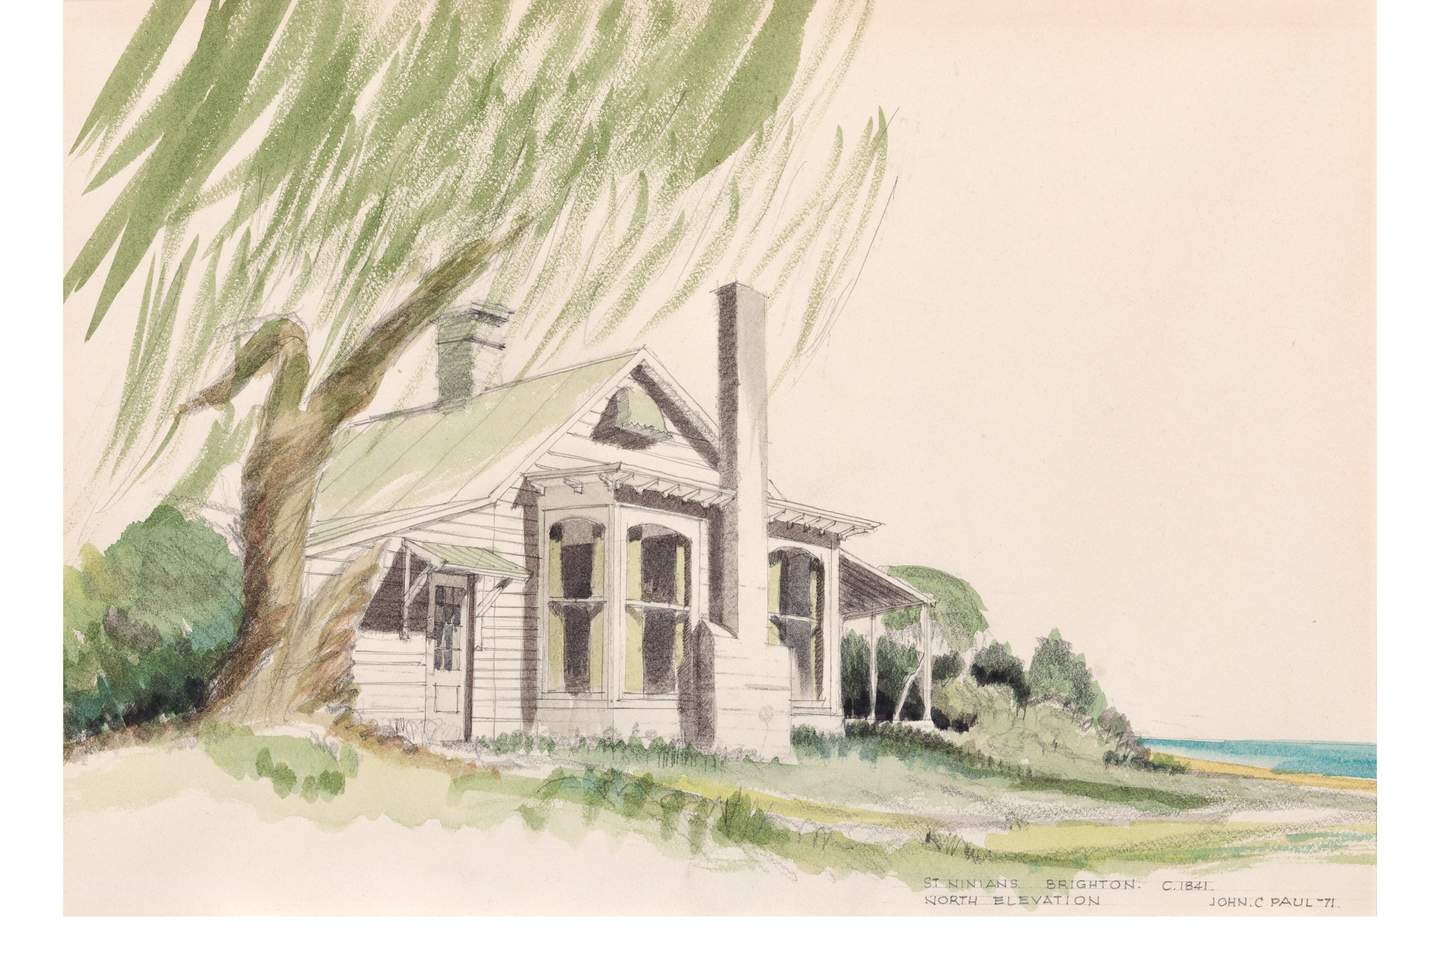 Watercolour of a white weatherboard house with a green roof surrounded by vegetation.